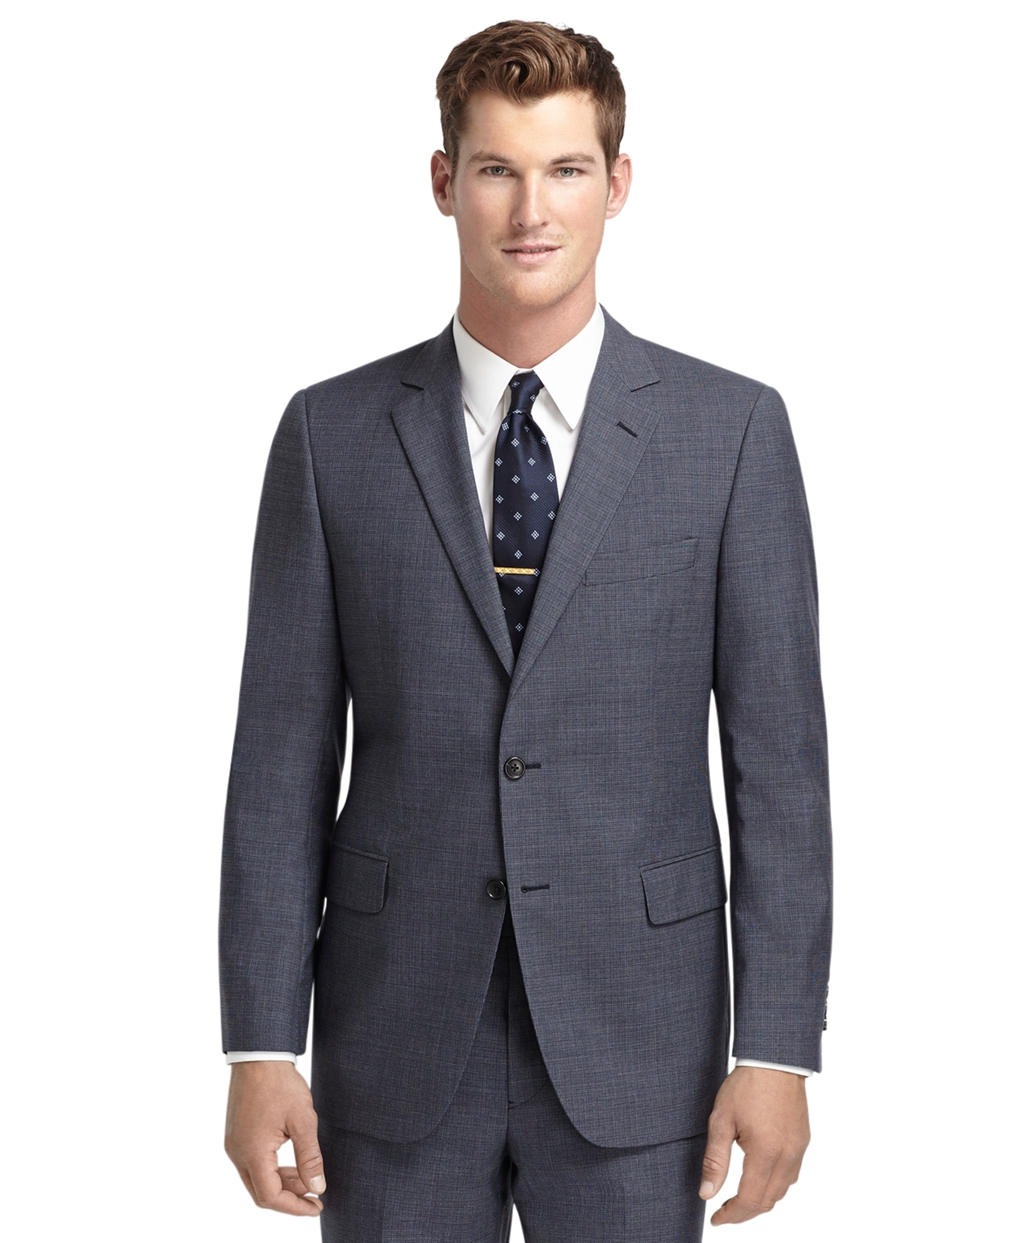 Lyst - Brooks brothers Fitzgerald Fit Navy Houndstooth Suit in Blue for Men